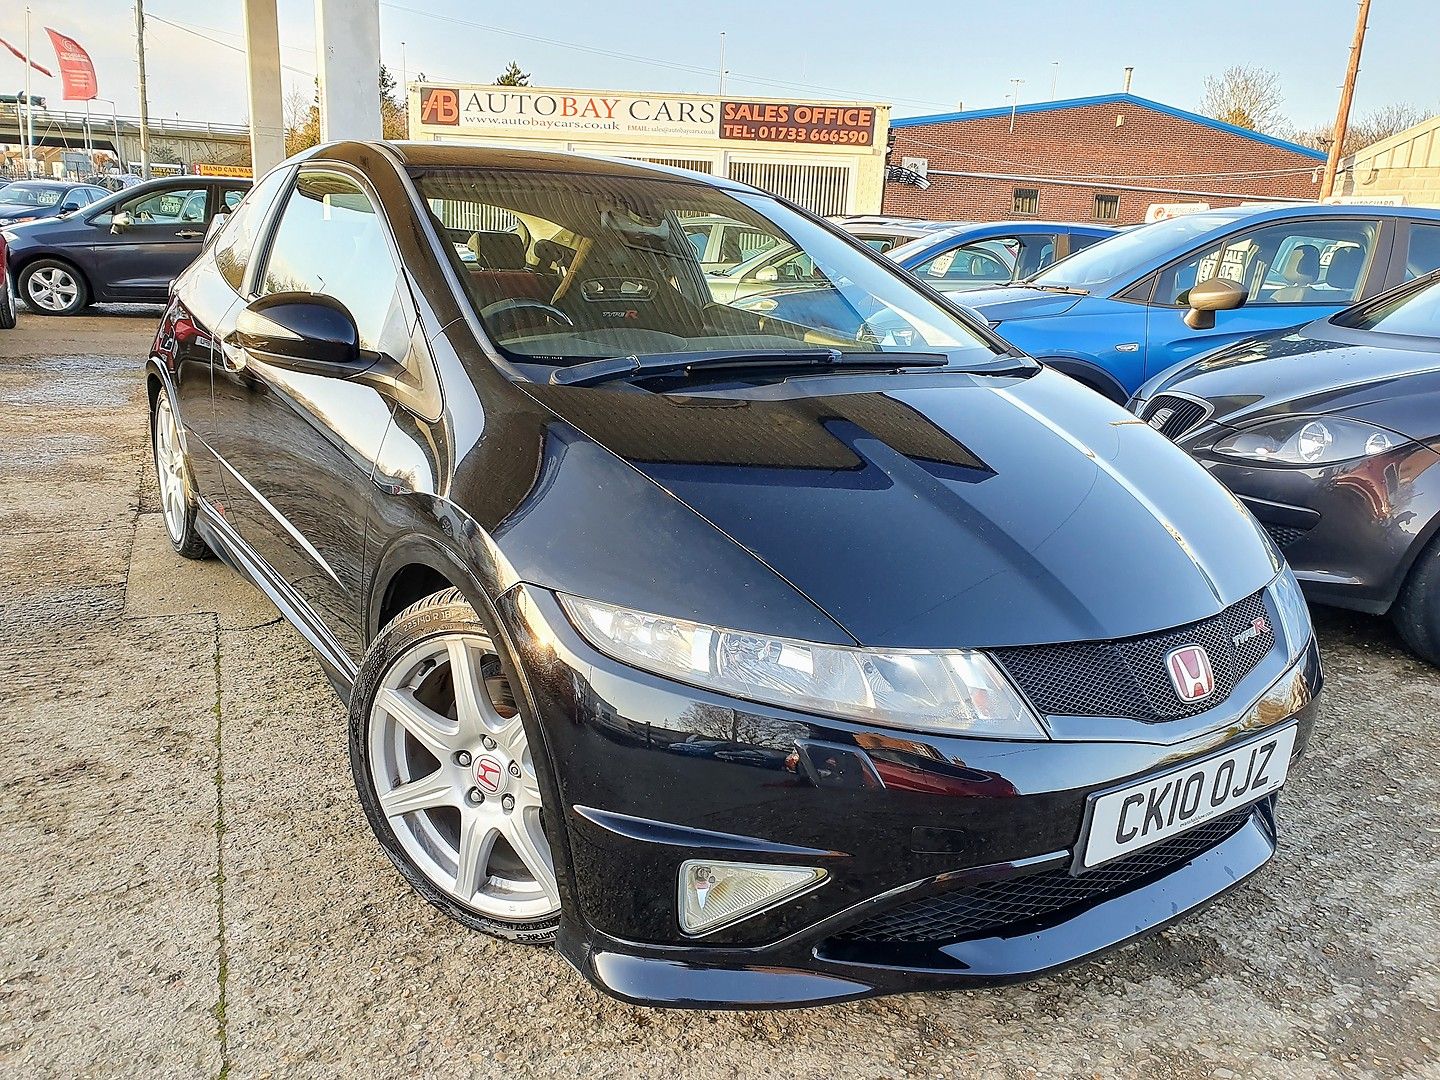 HONDA Civic 2.0 iVTEC TYPE R GT (2010) for sale in